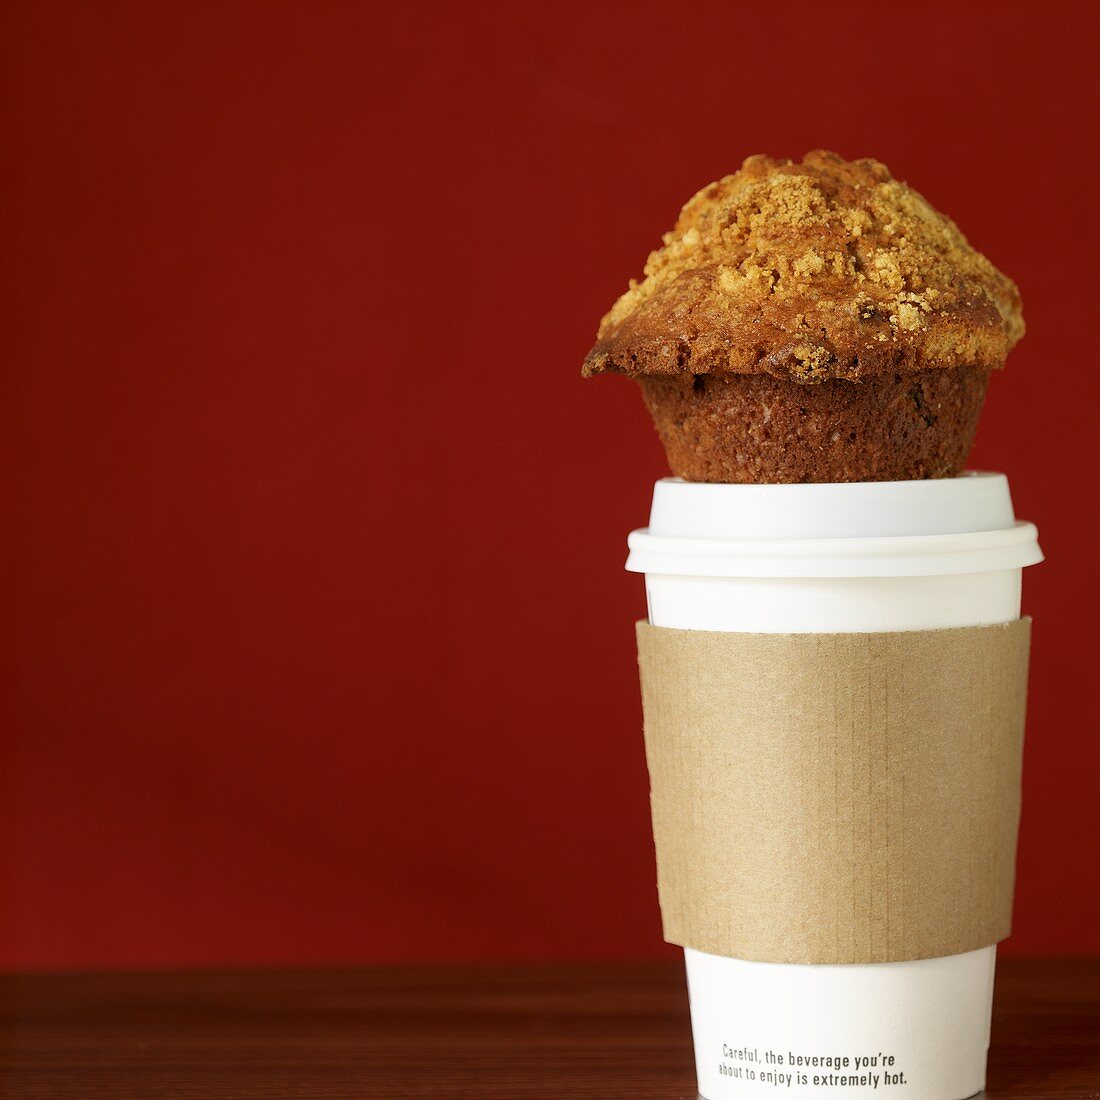 A muffin on a plastic coffee cup